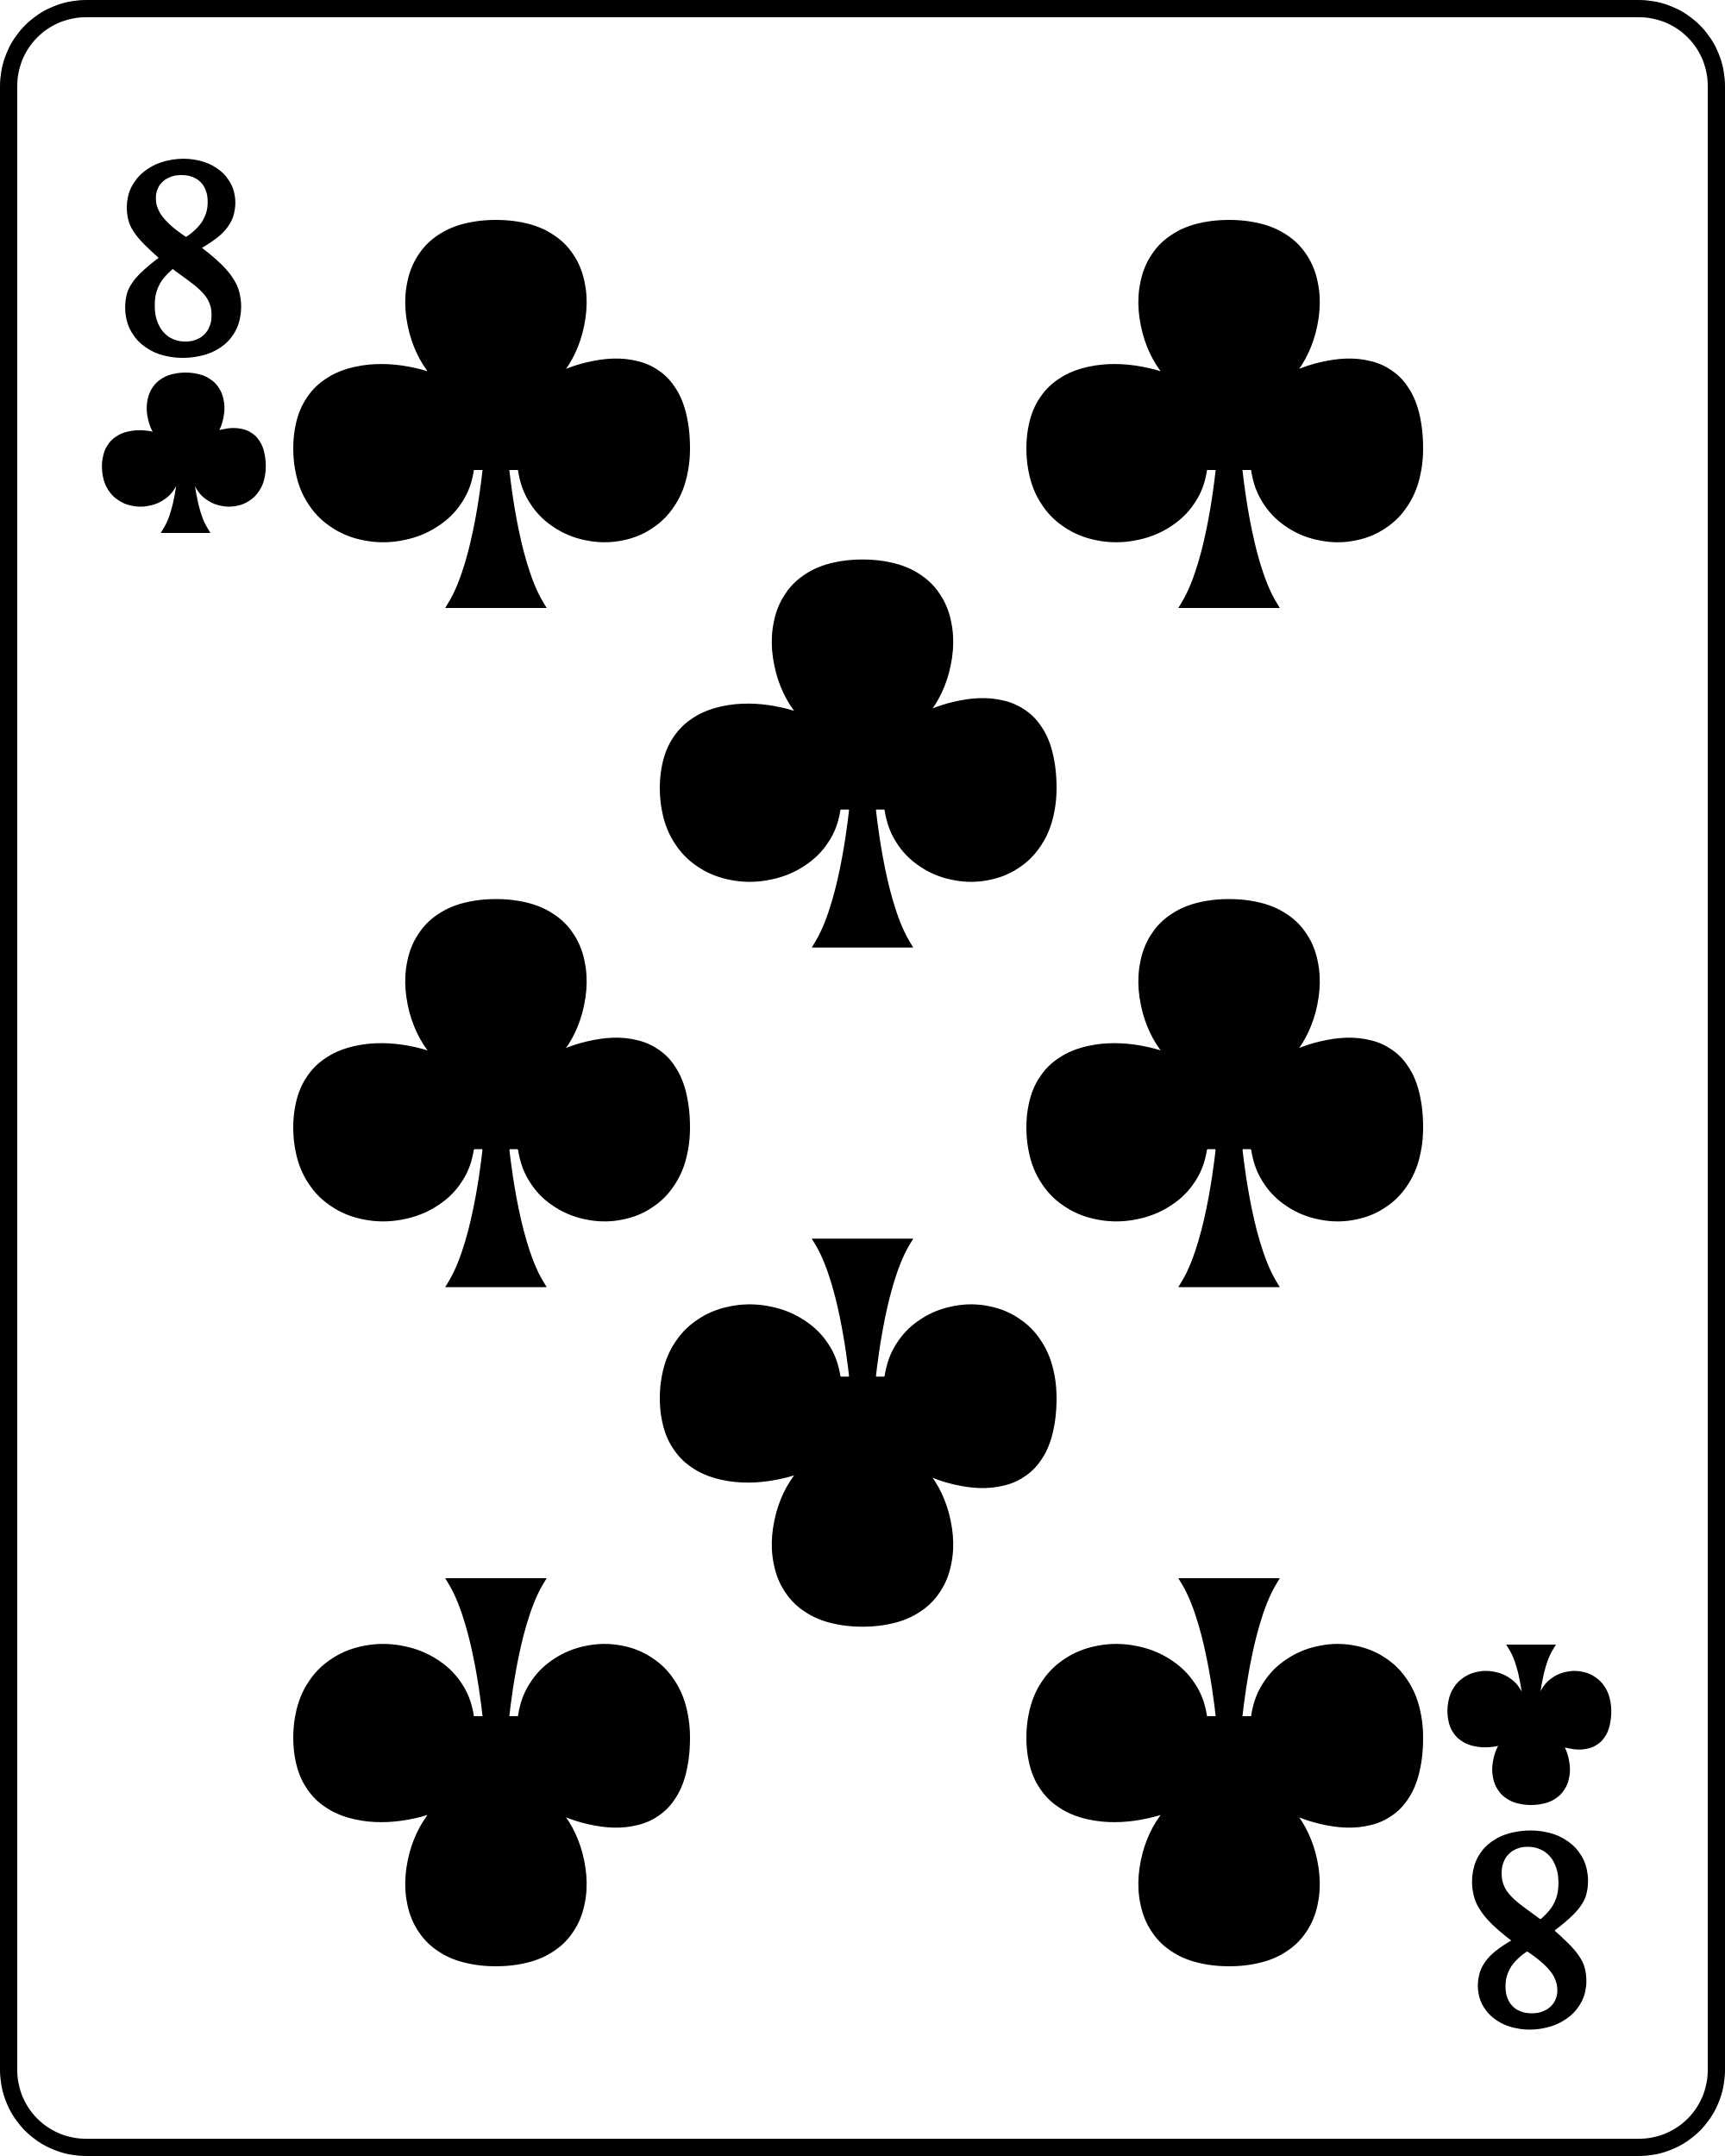 File:Playing card club 8 - Wikimedia Commons